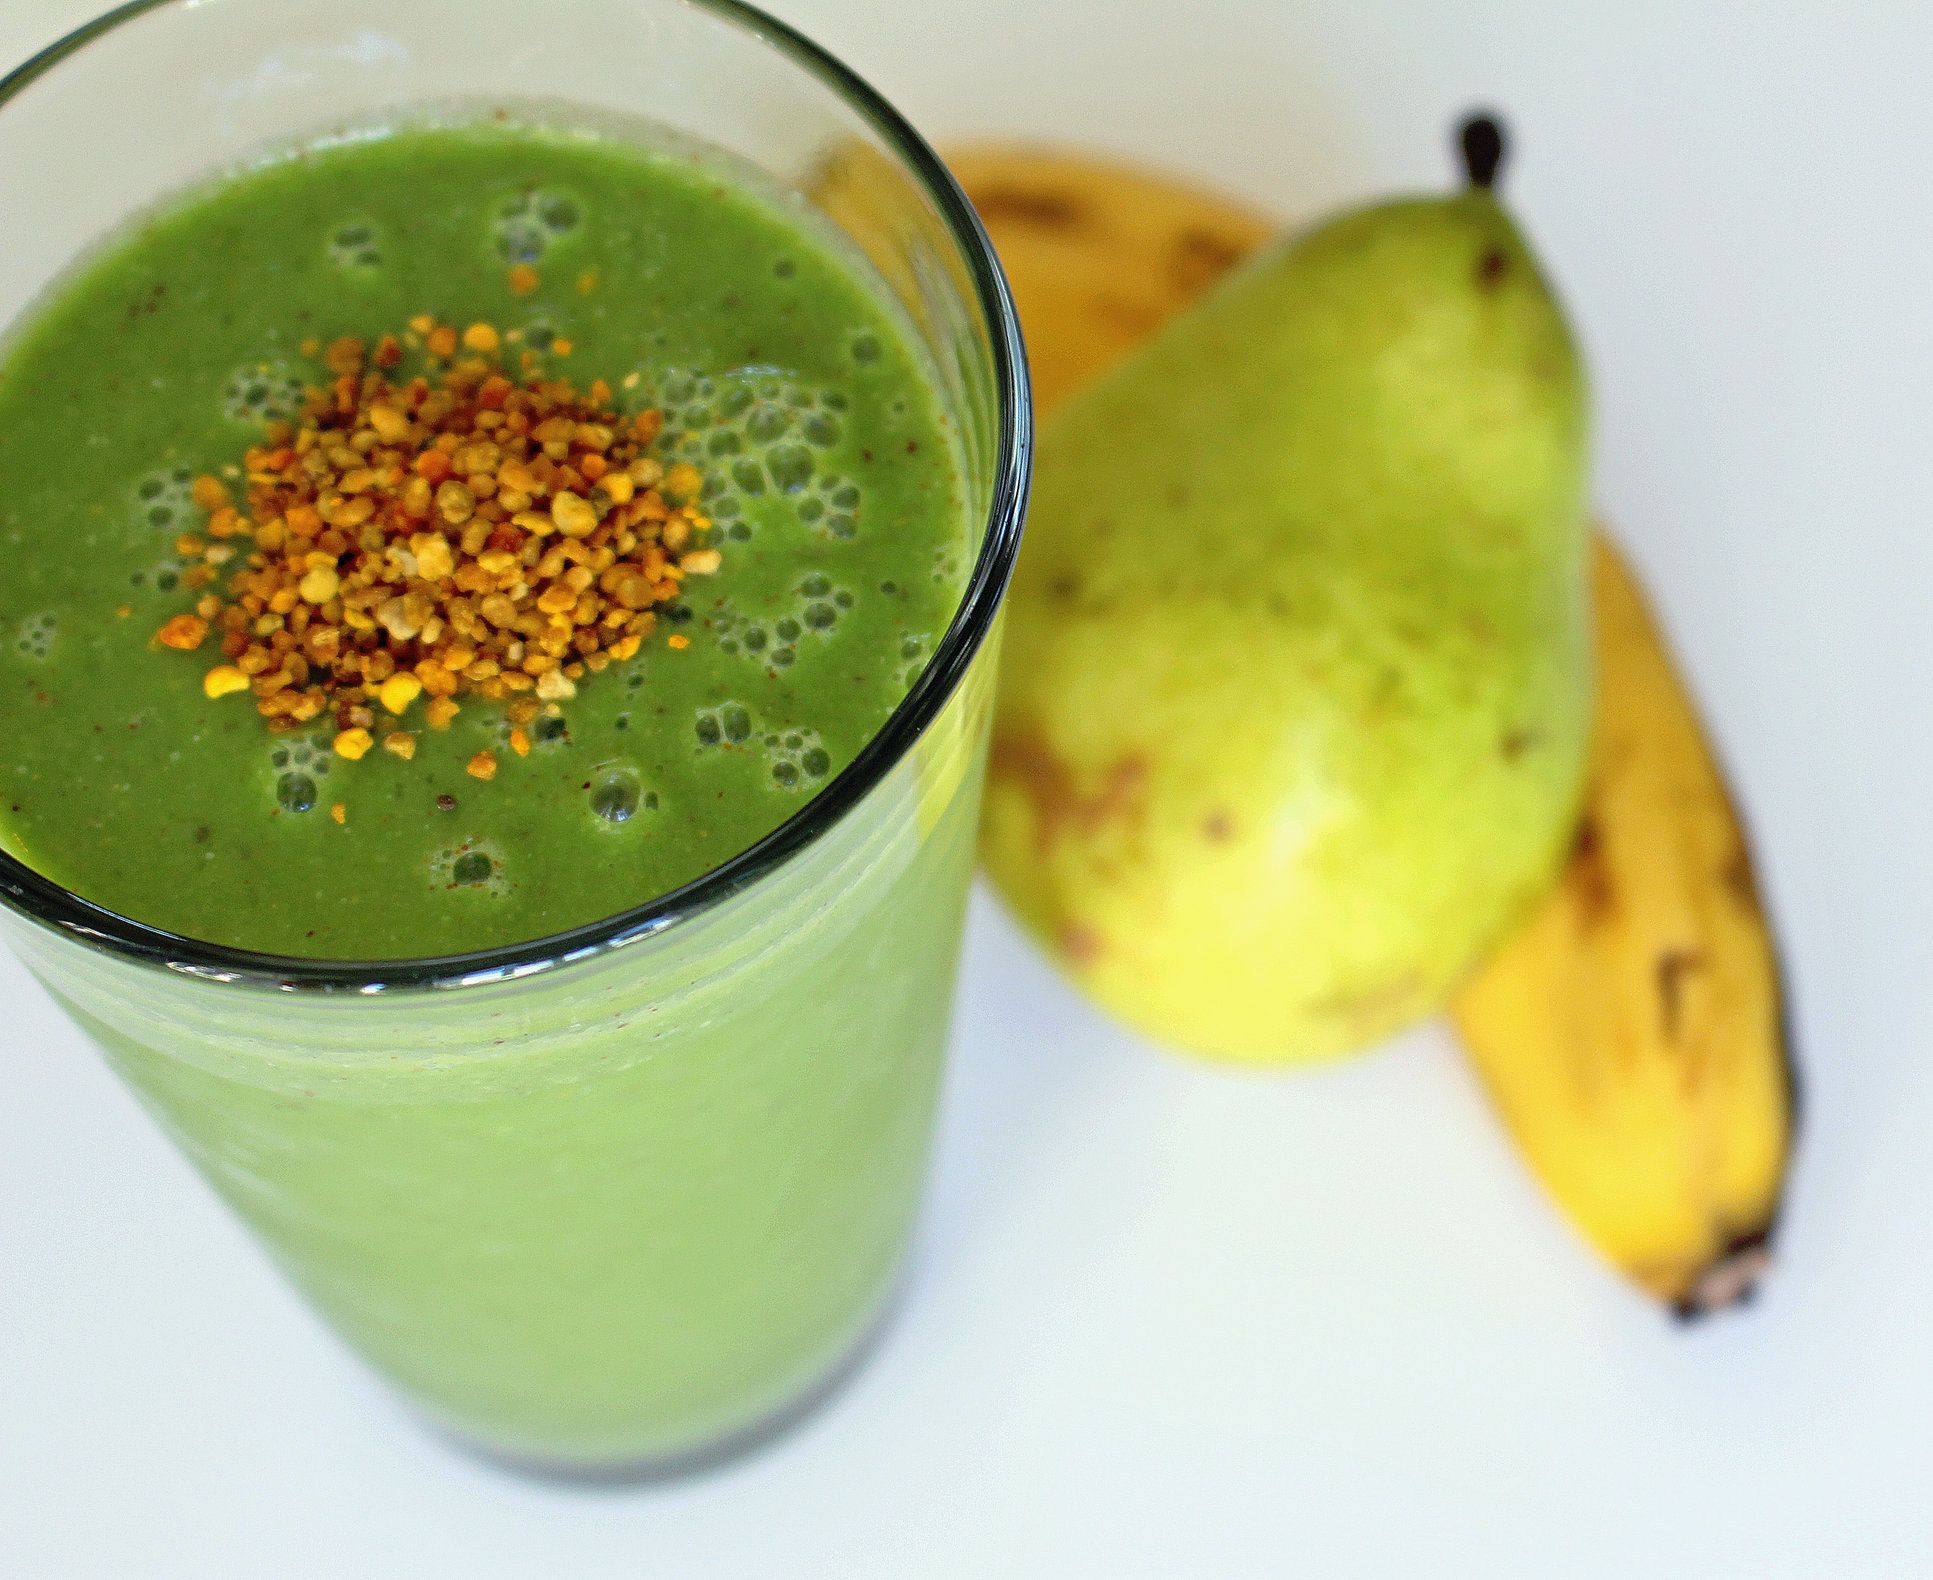 Green Smoothie with Almond milk and Pear